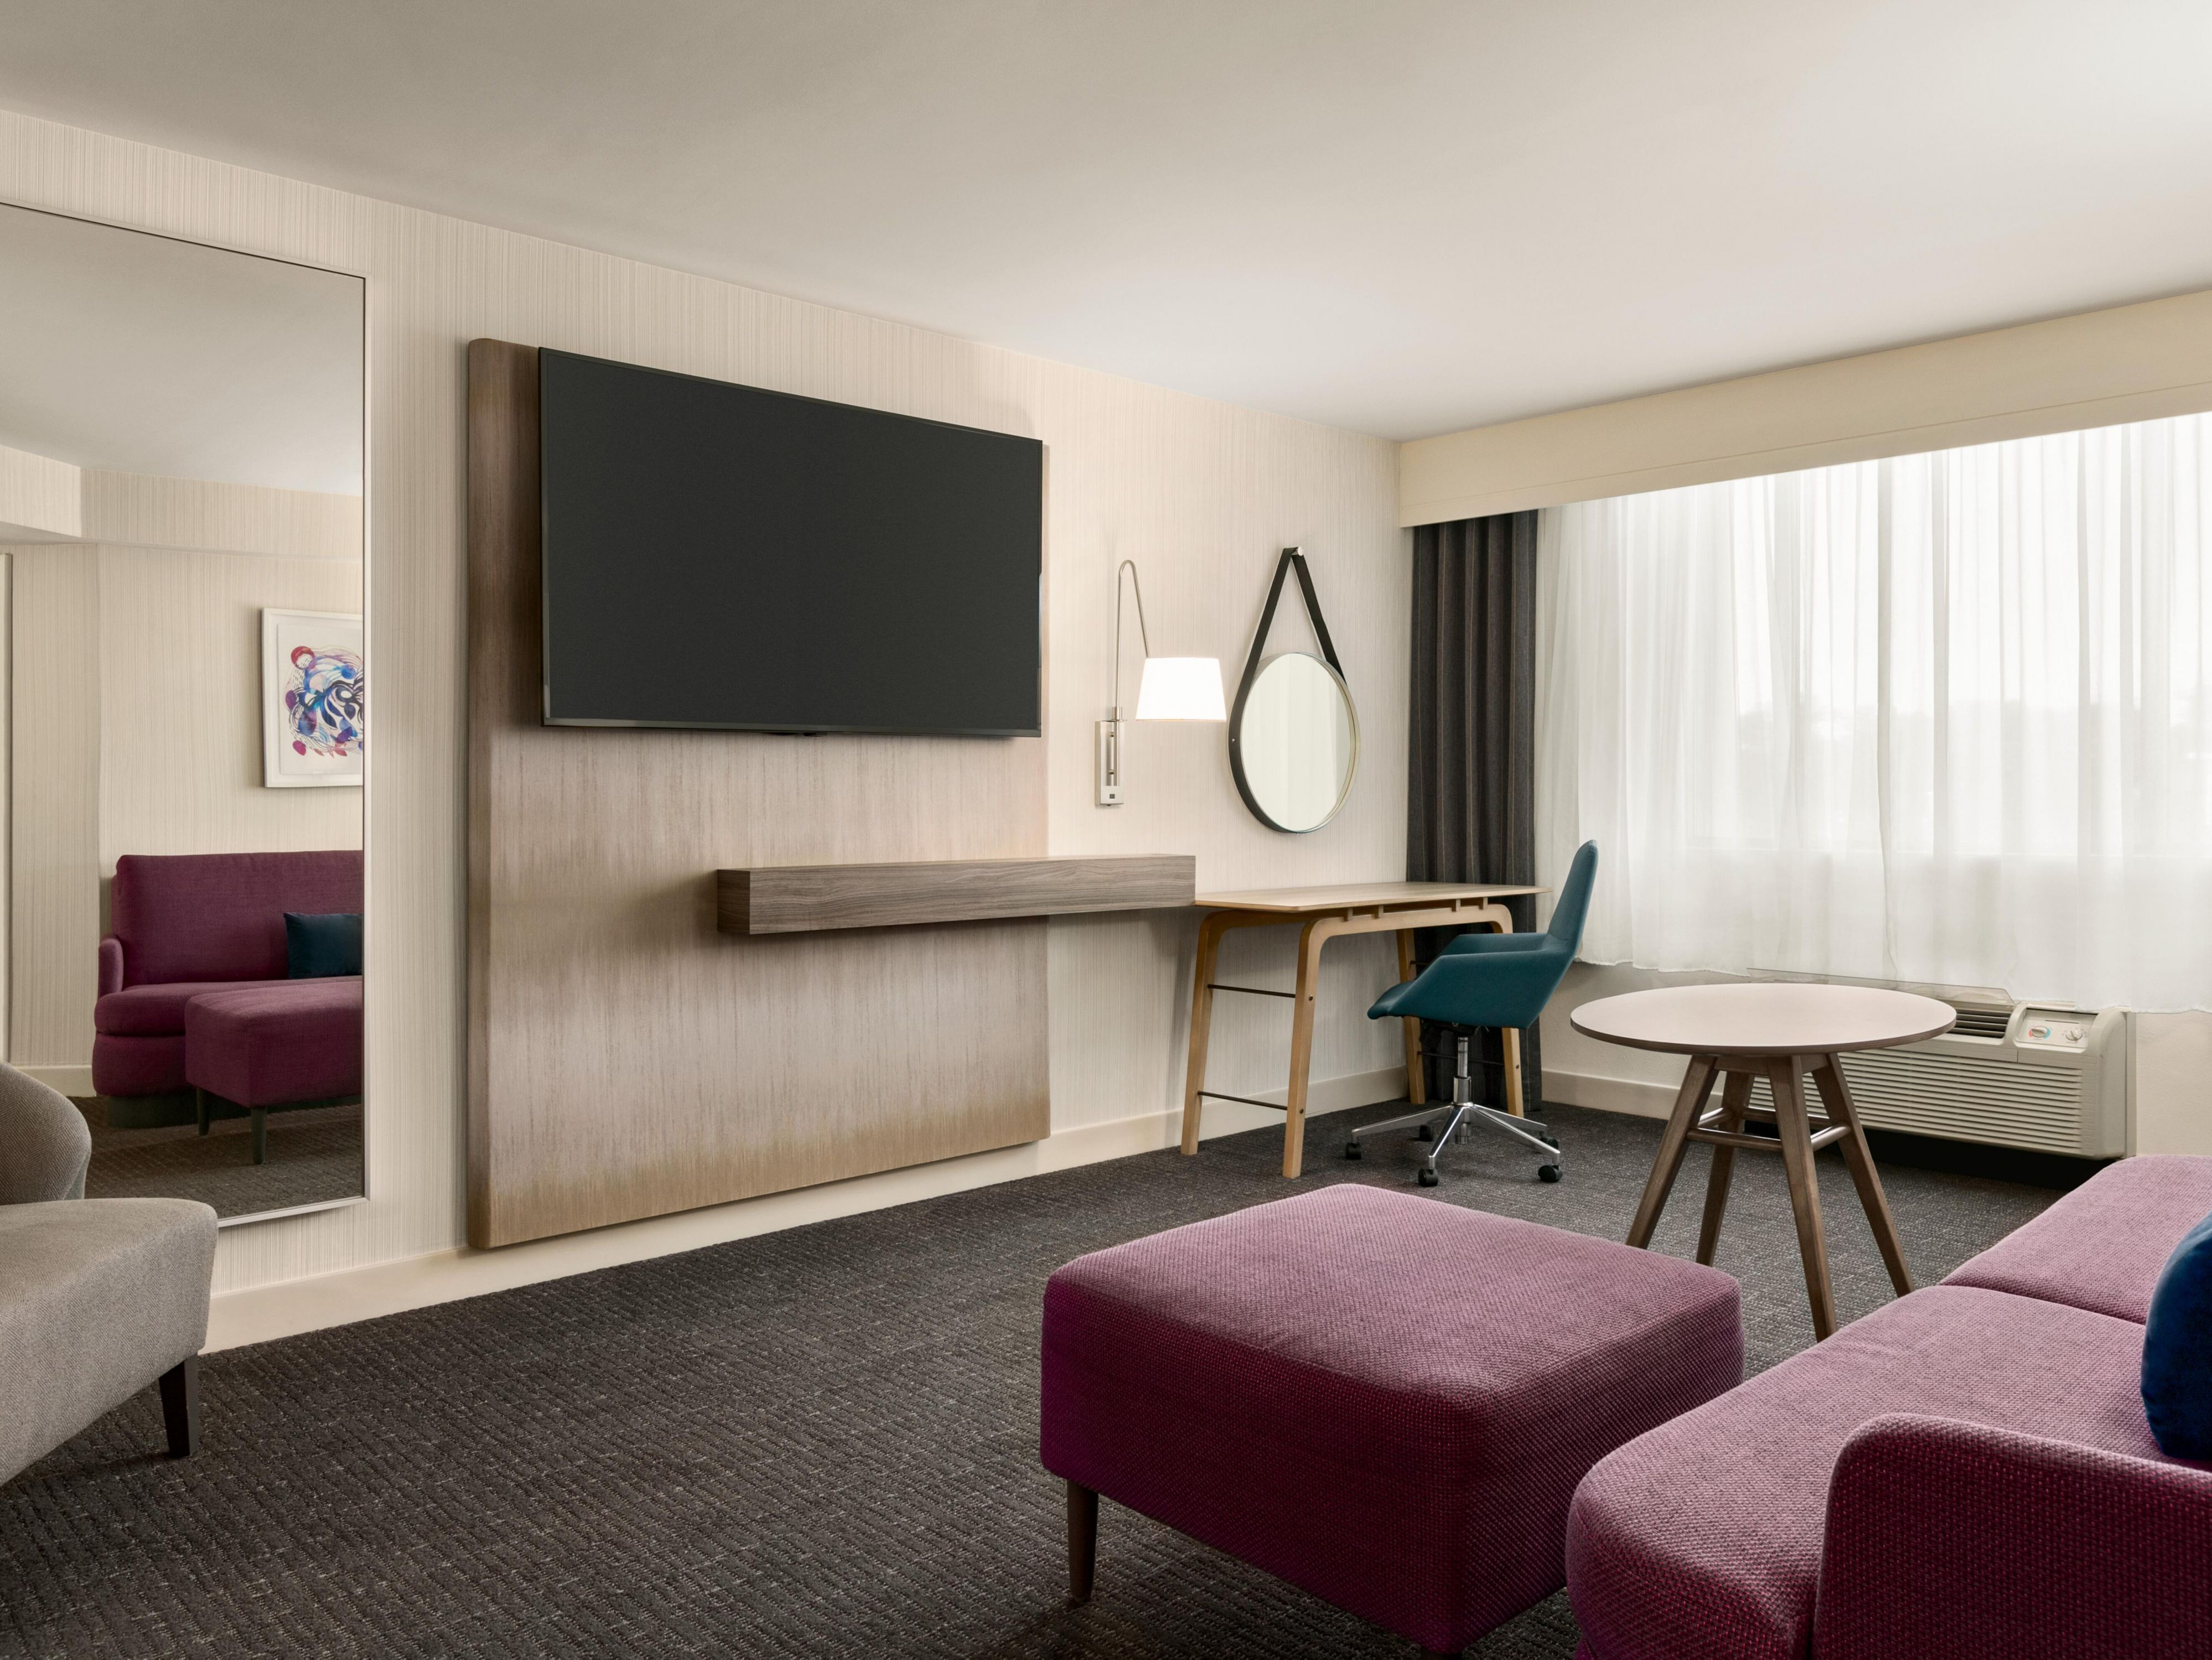 Our King Suite offers separate living space and guestroom.